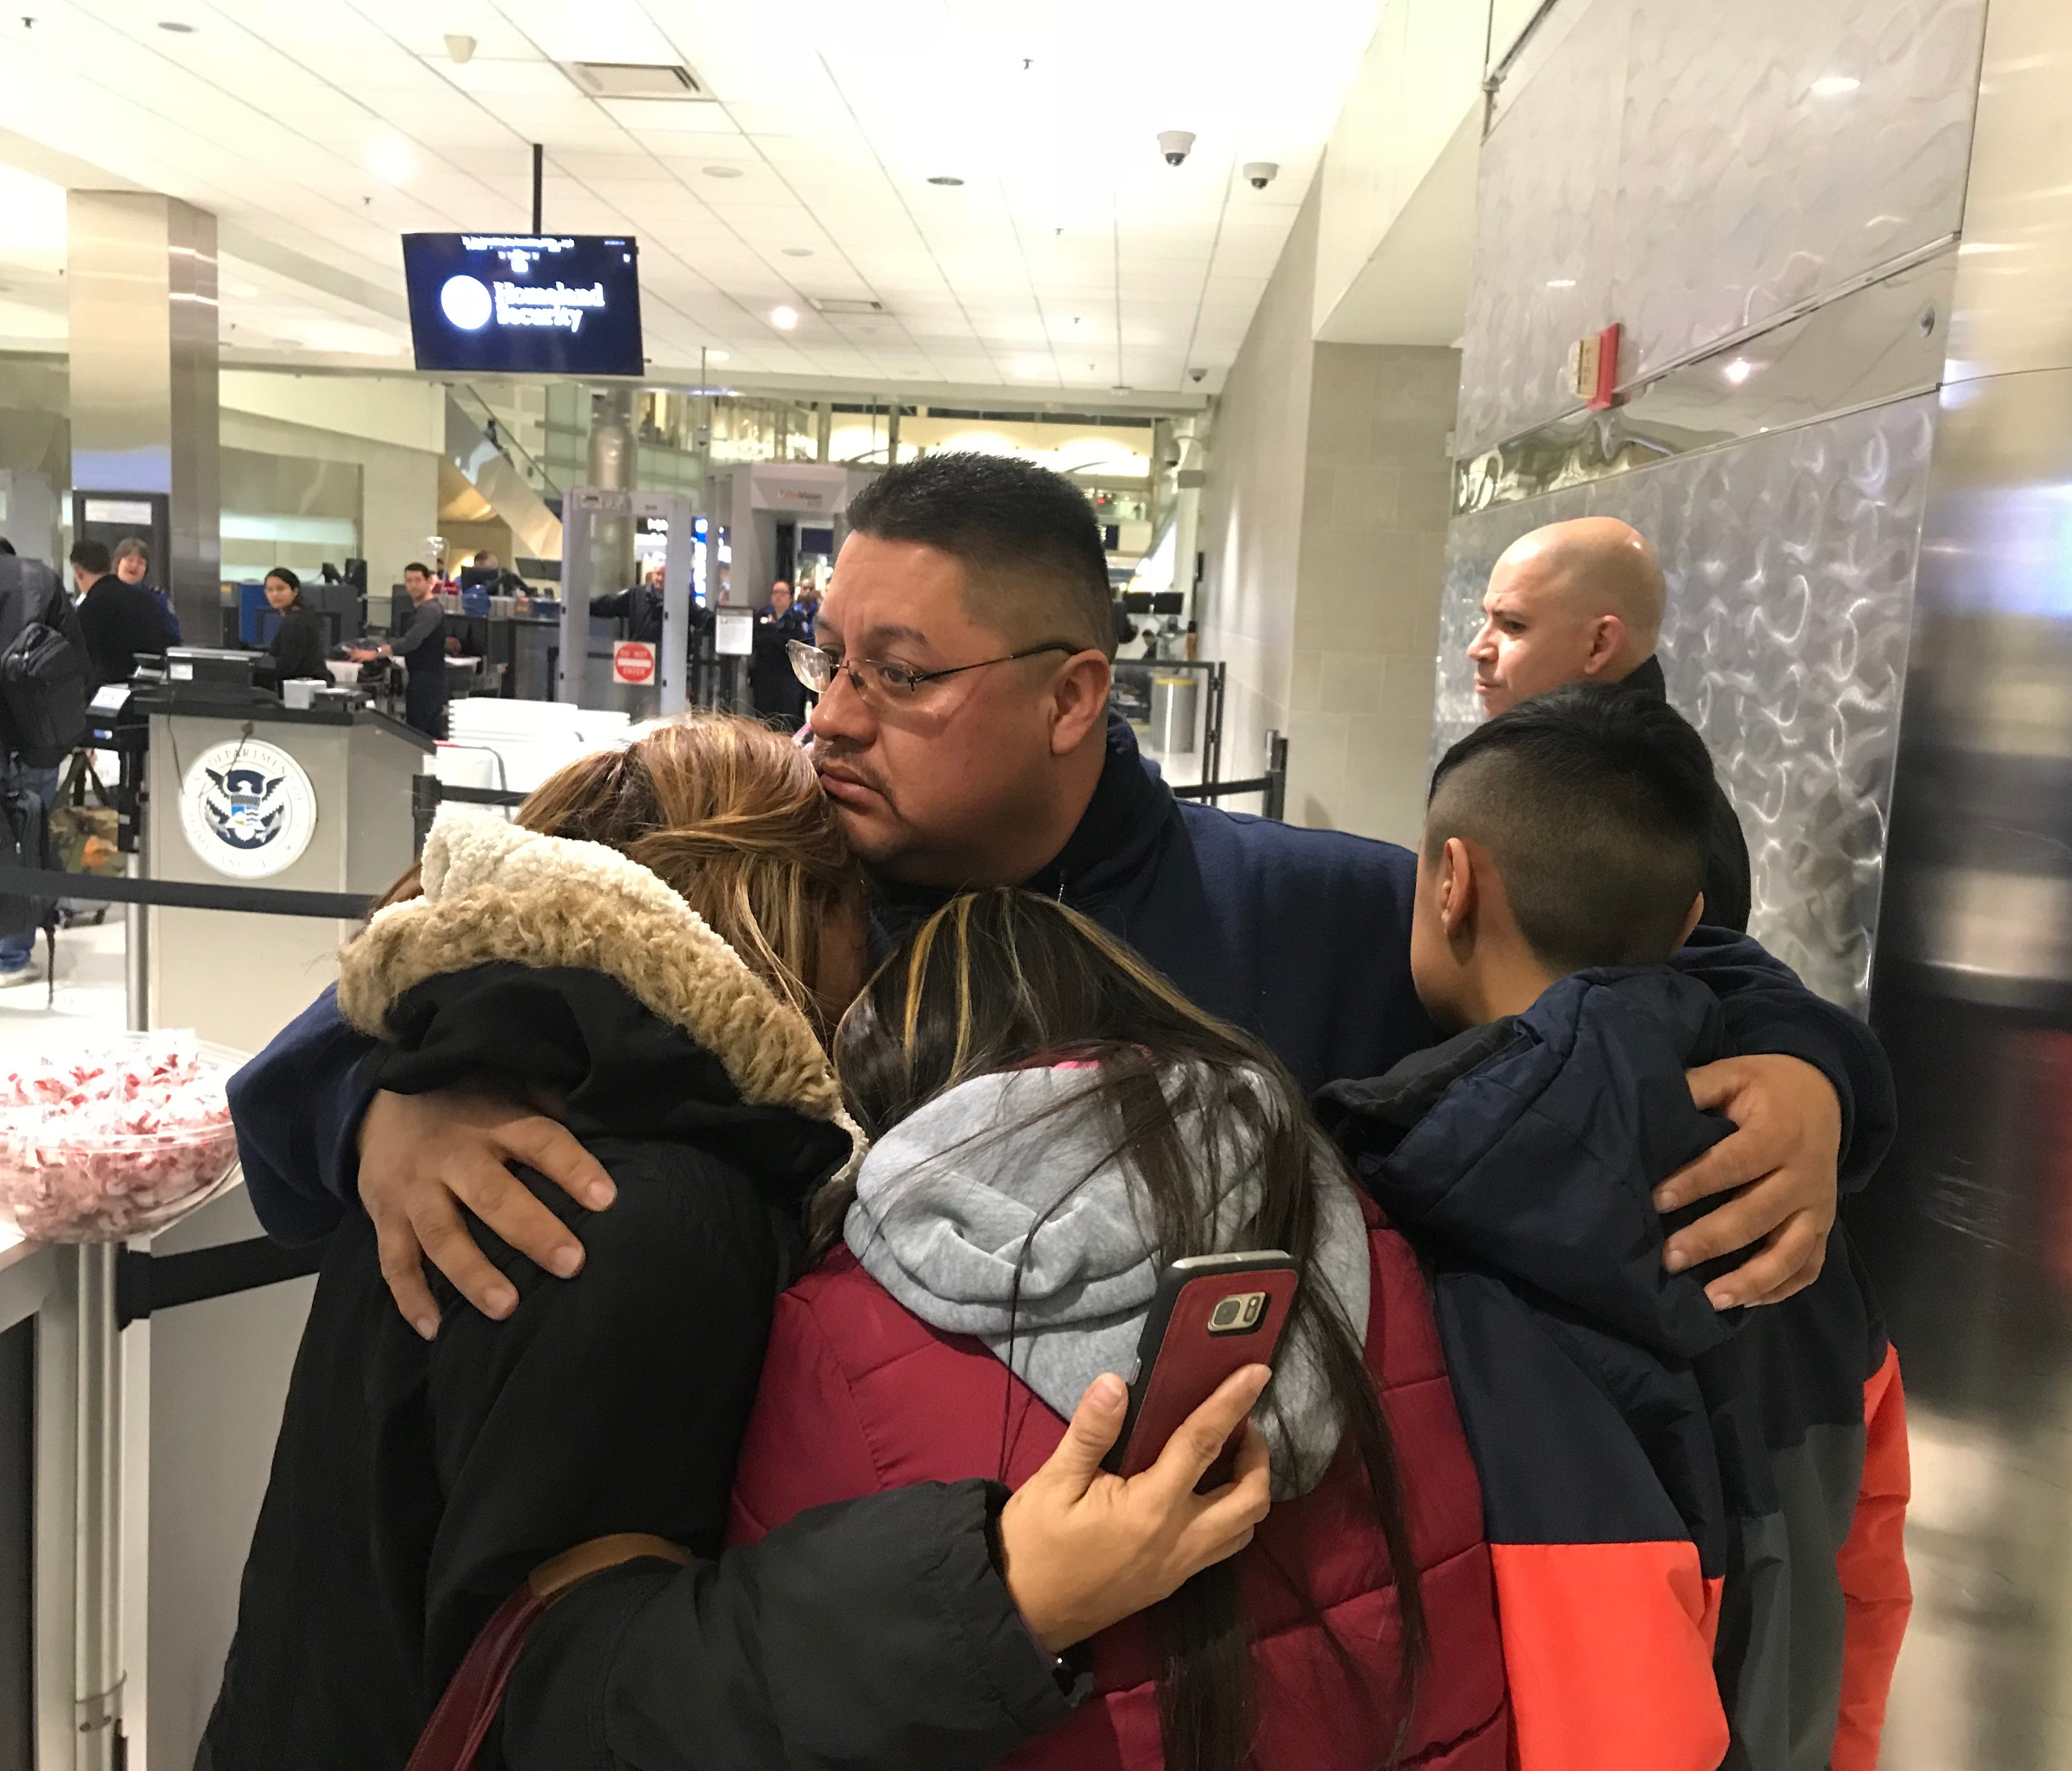 Jorge Garcia, 39, of Lincoln Park, hugs his wife, Cindy Garcia, and their two children at Detroit Metro Airport on Jan. 15, 2018, moments before boarding a flight to Mexico. He was ordered deported after living in the U.S. since he was 10 years old, 